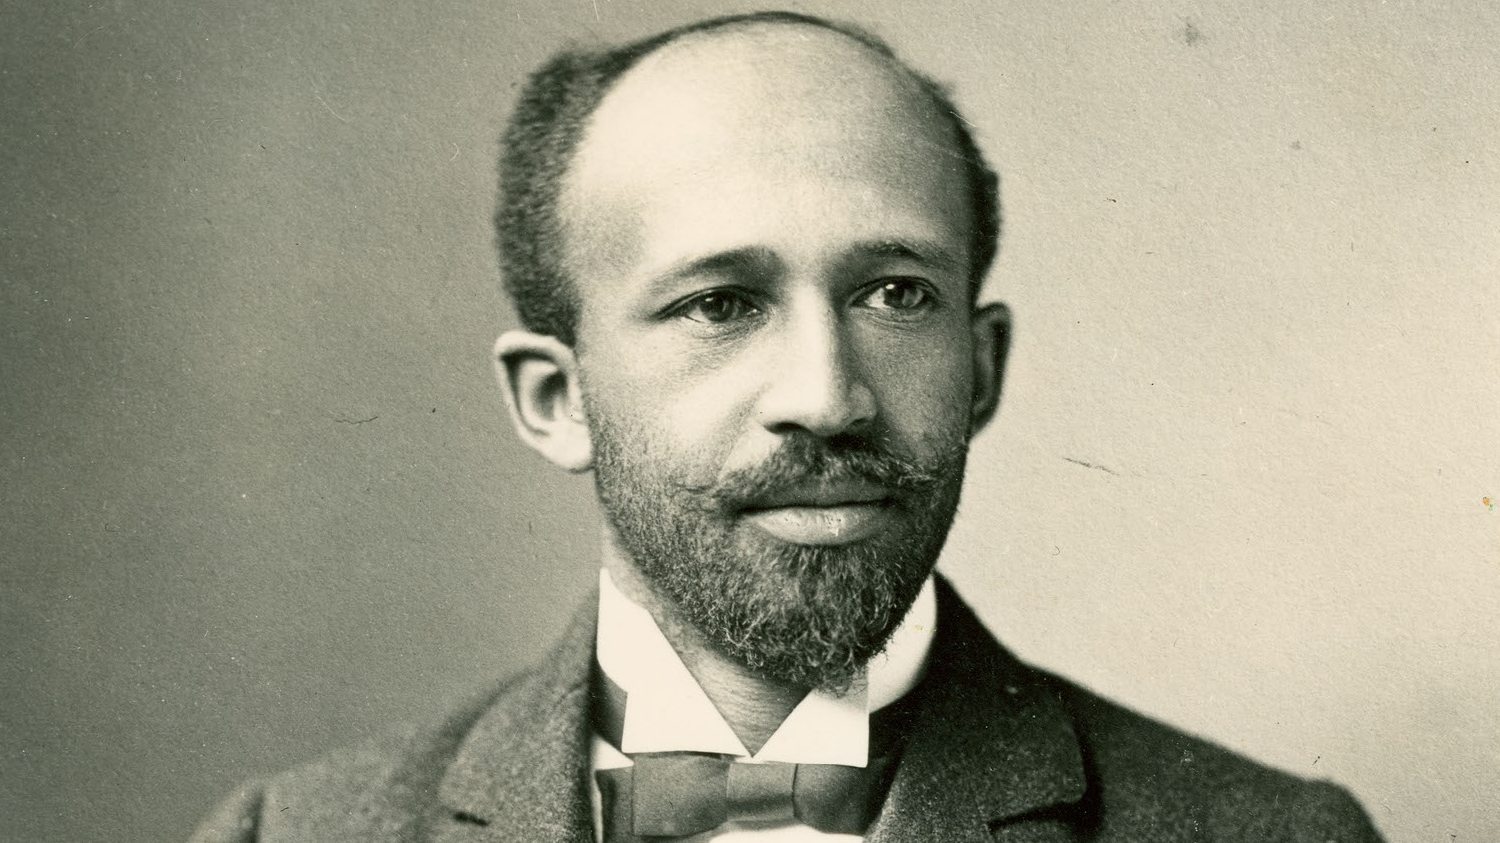 W. E. B. Du Bois. Credit: W. E. B. Du Bois Papers, Robert S. Cox Special Collections and University Archives Research Center, UMass Amherst Libraries.